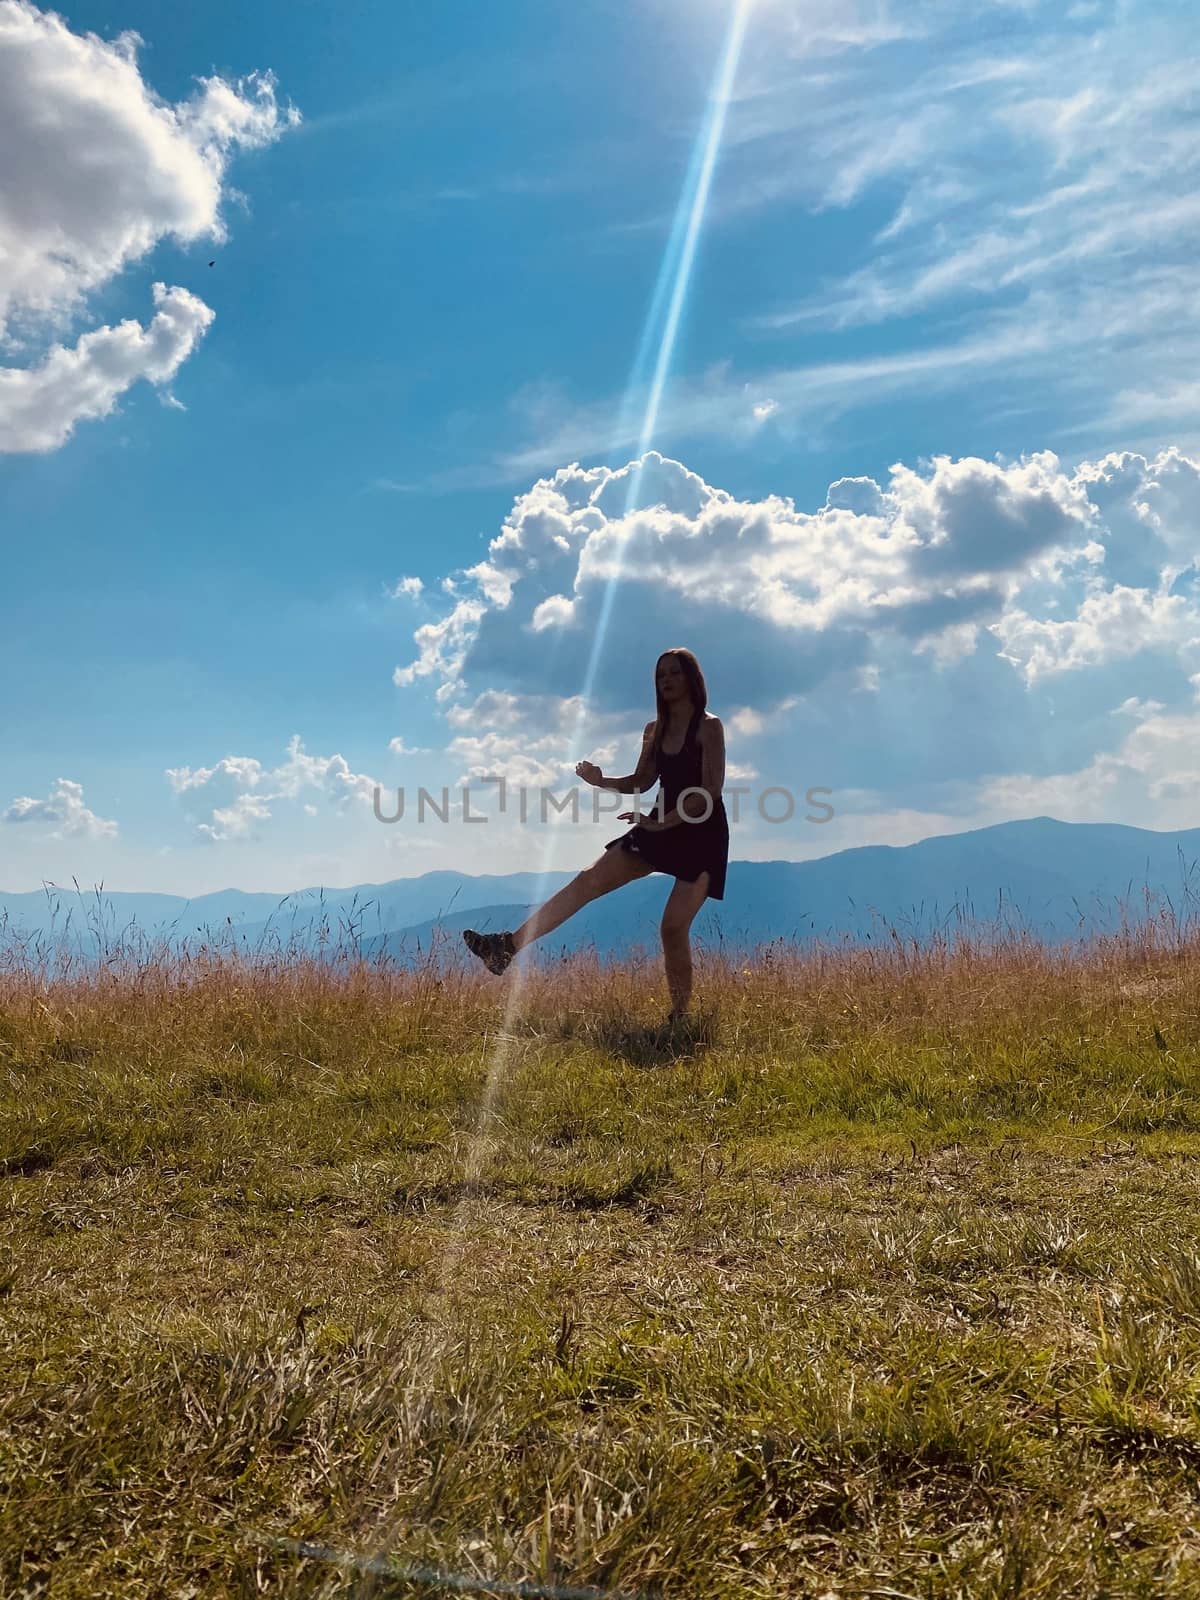 woman, jump, sky, happy, freedom, young, summer, people, grass, blue, jumping, nature, fun, field, joy, happiness, active, beautiful, green, beauty, person, lifestyle, energy, spring, outdoor